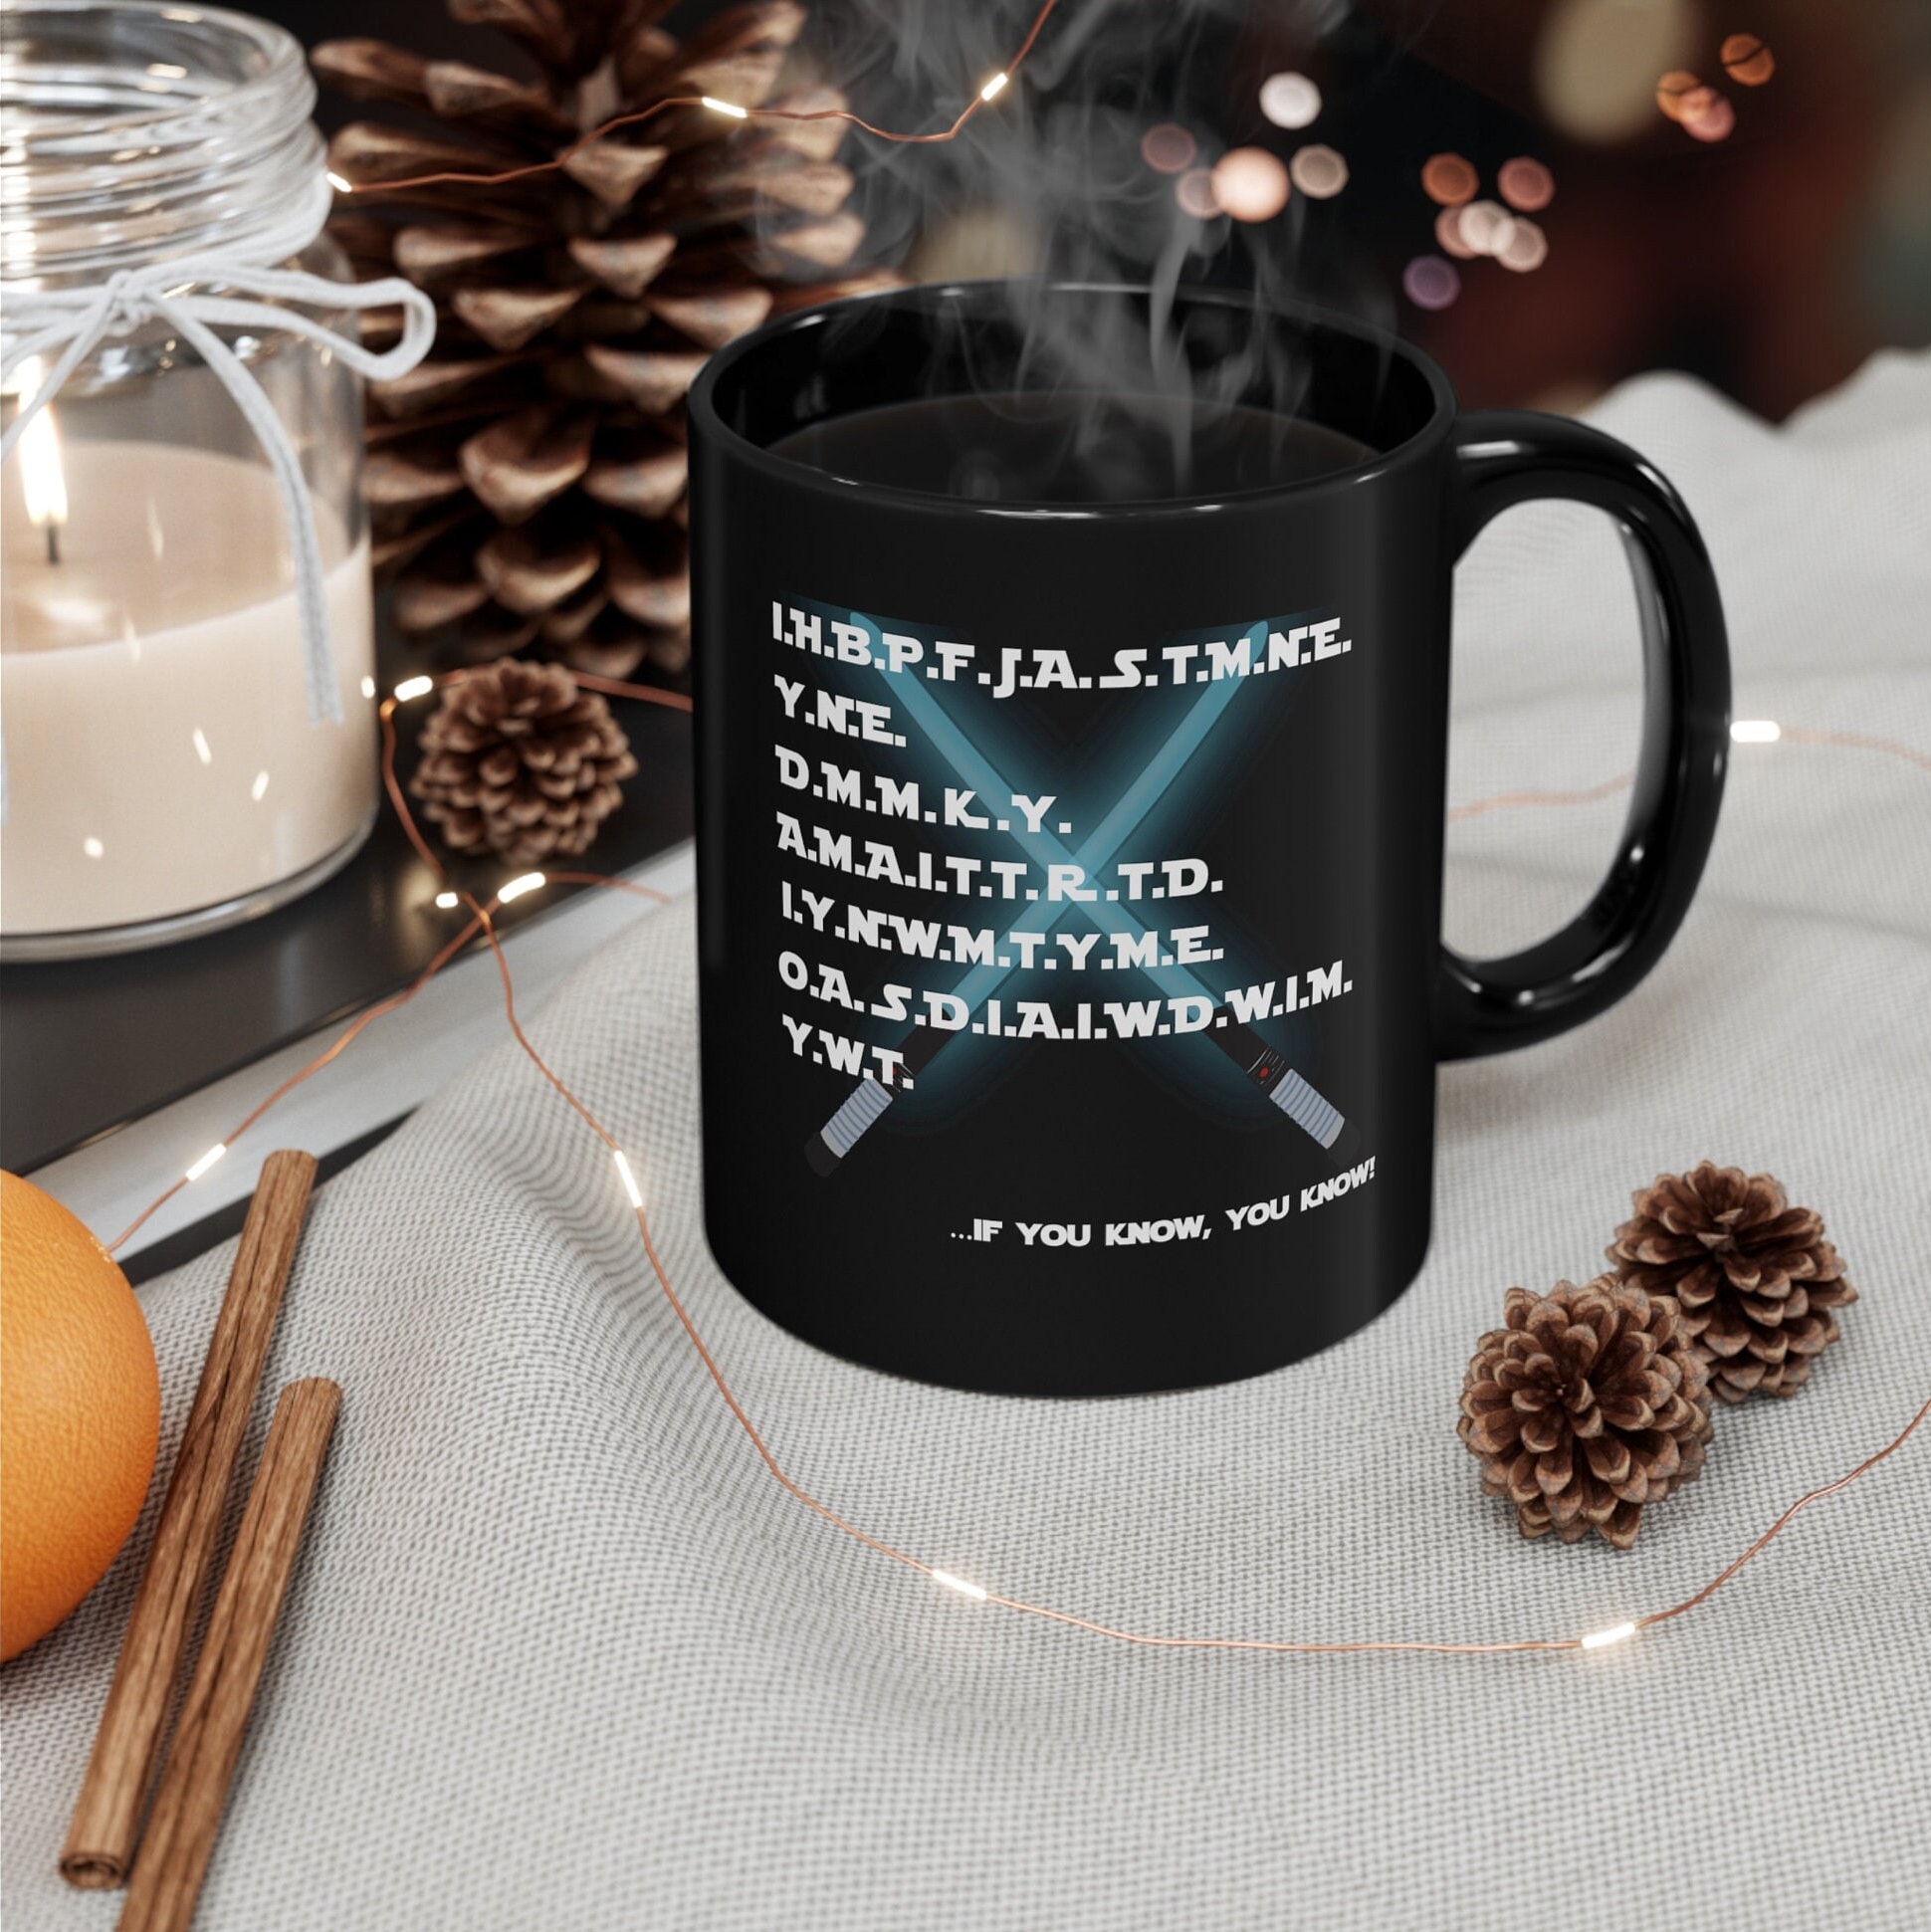 I Have Brought Peace, Freedom, Justice, and Security | Coffee Mug